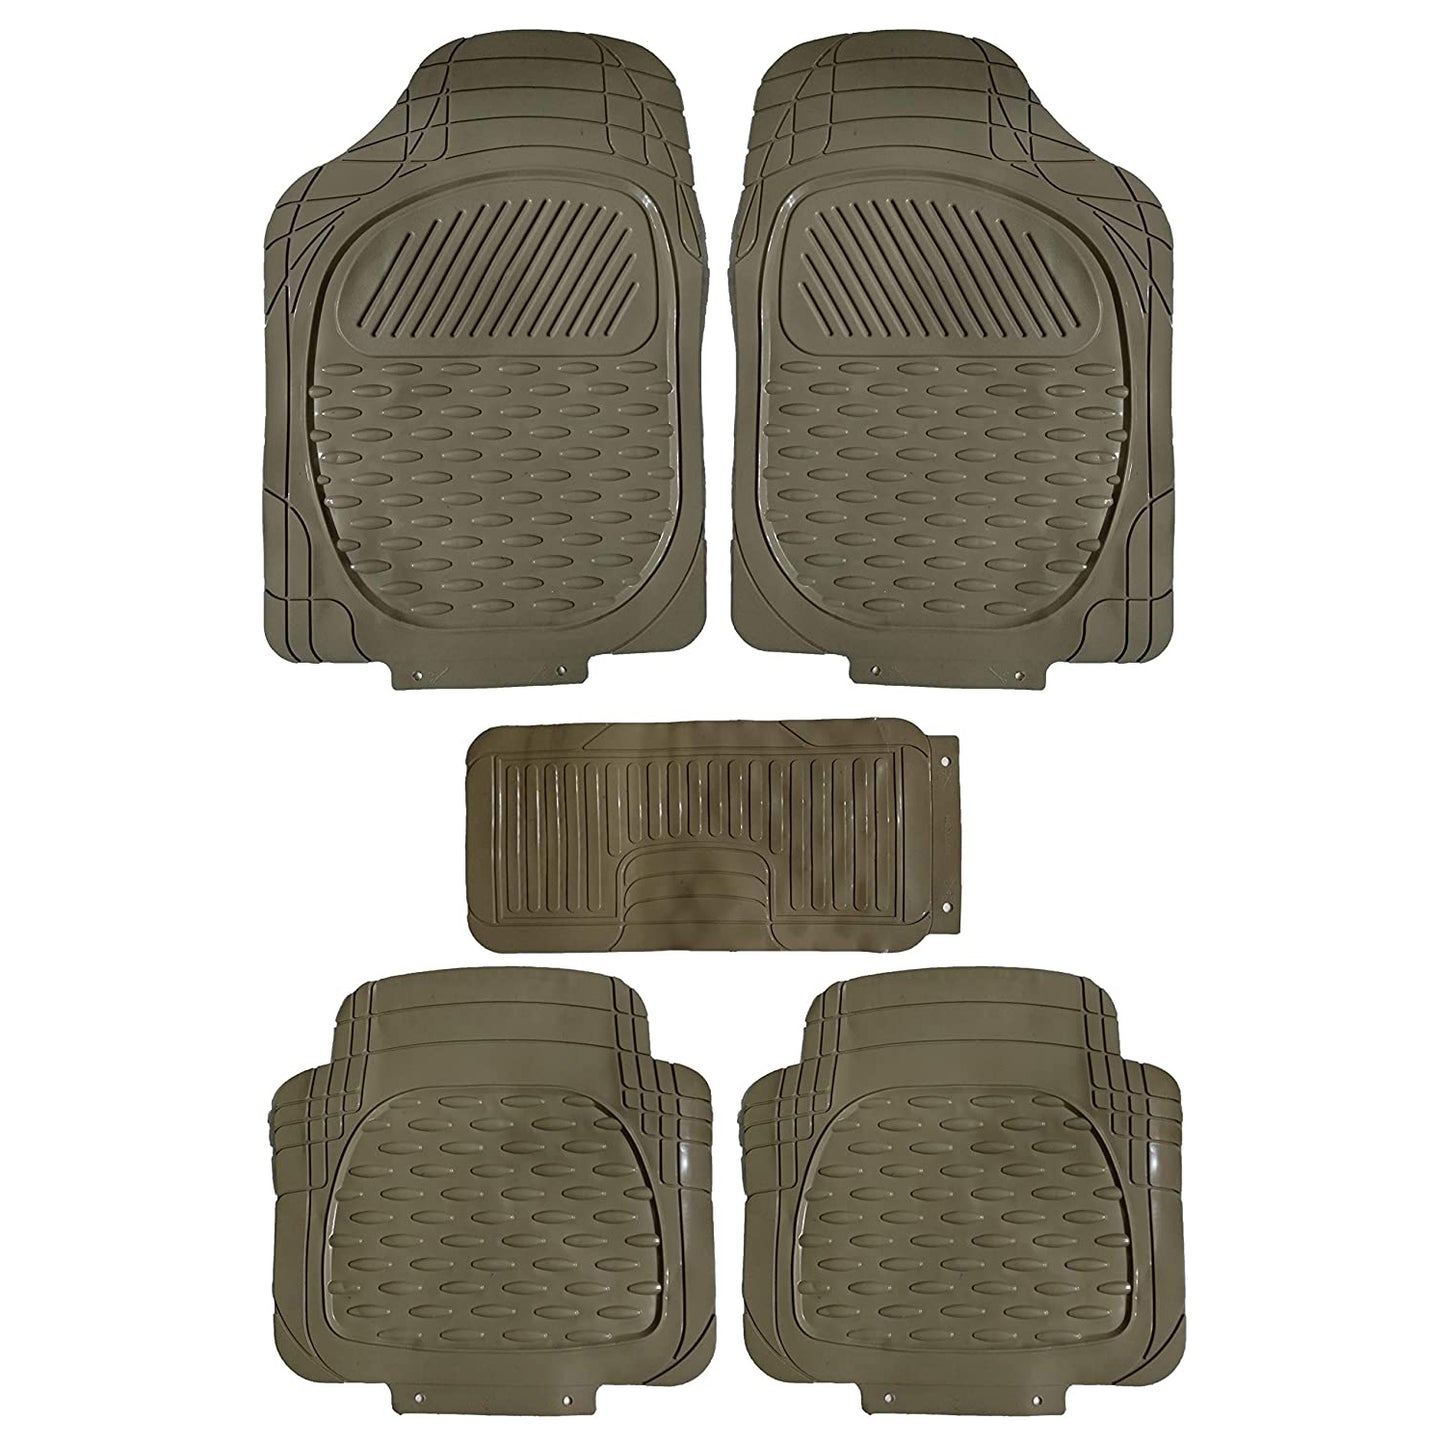 Oshotto (6255) Anti Skid Rubber Car Foot Mat for All Cars (Set of 5, Beige)